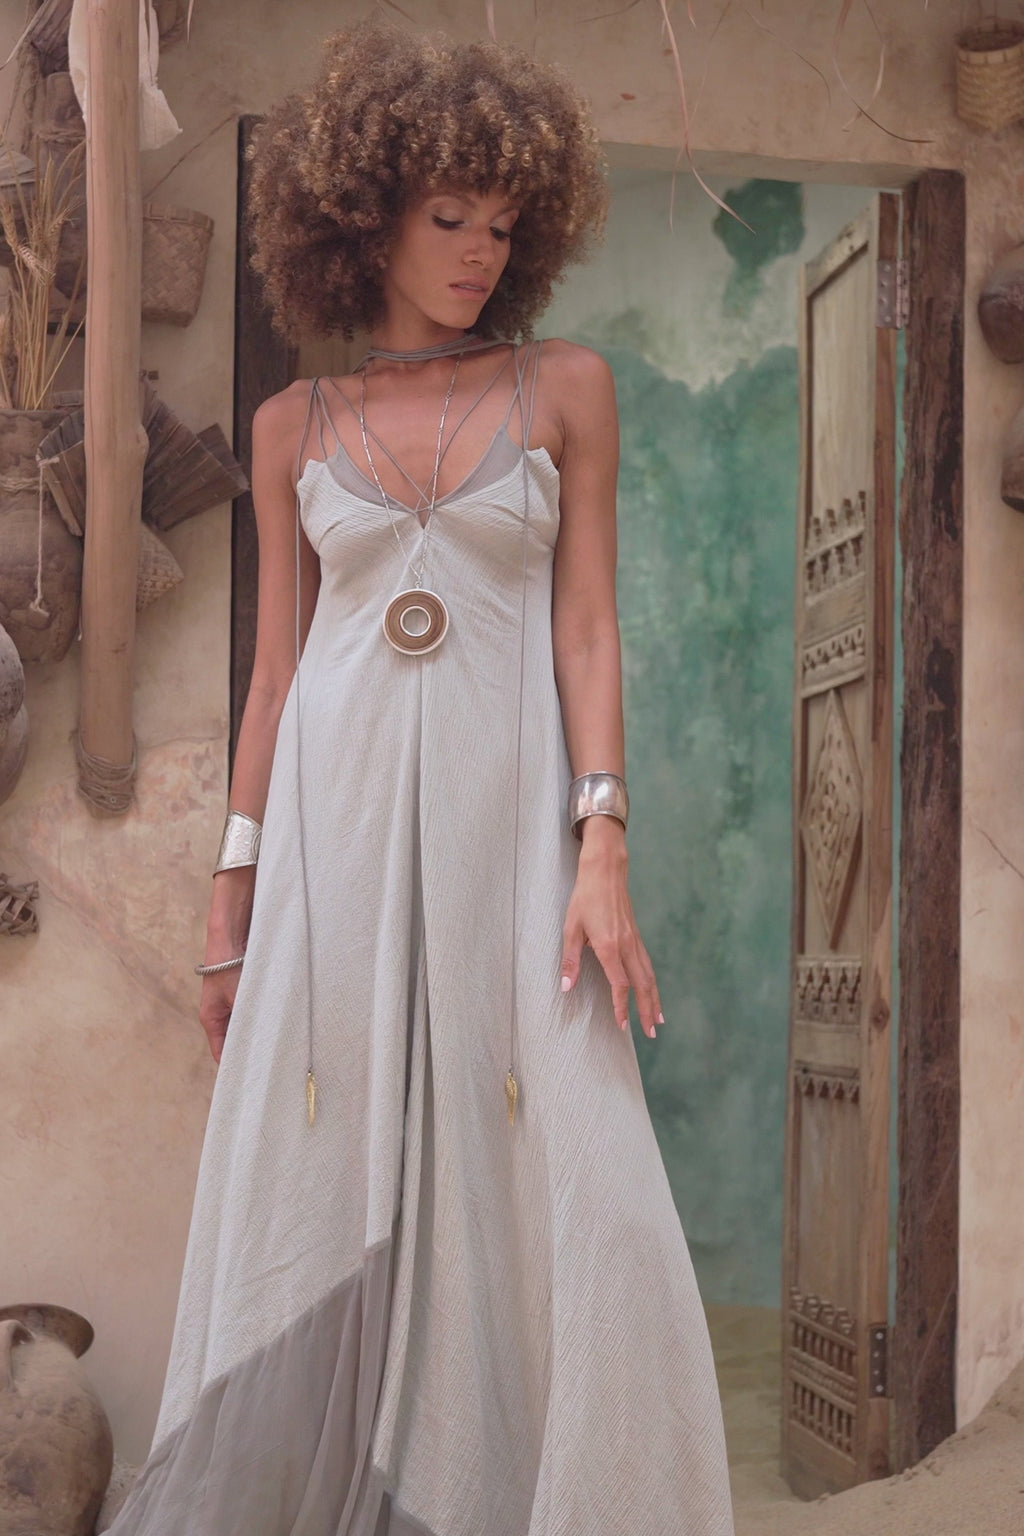 Enhance your wardrobe with the exquisite Powder Blue Goddess Dress from Aya Sacred Wear - a timeless and unique piece to add to your collection!